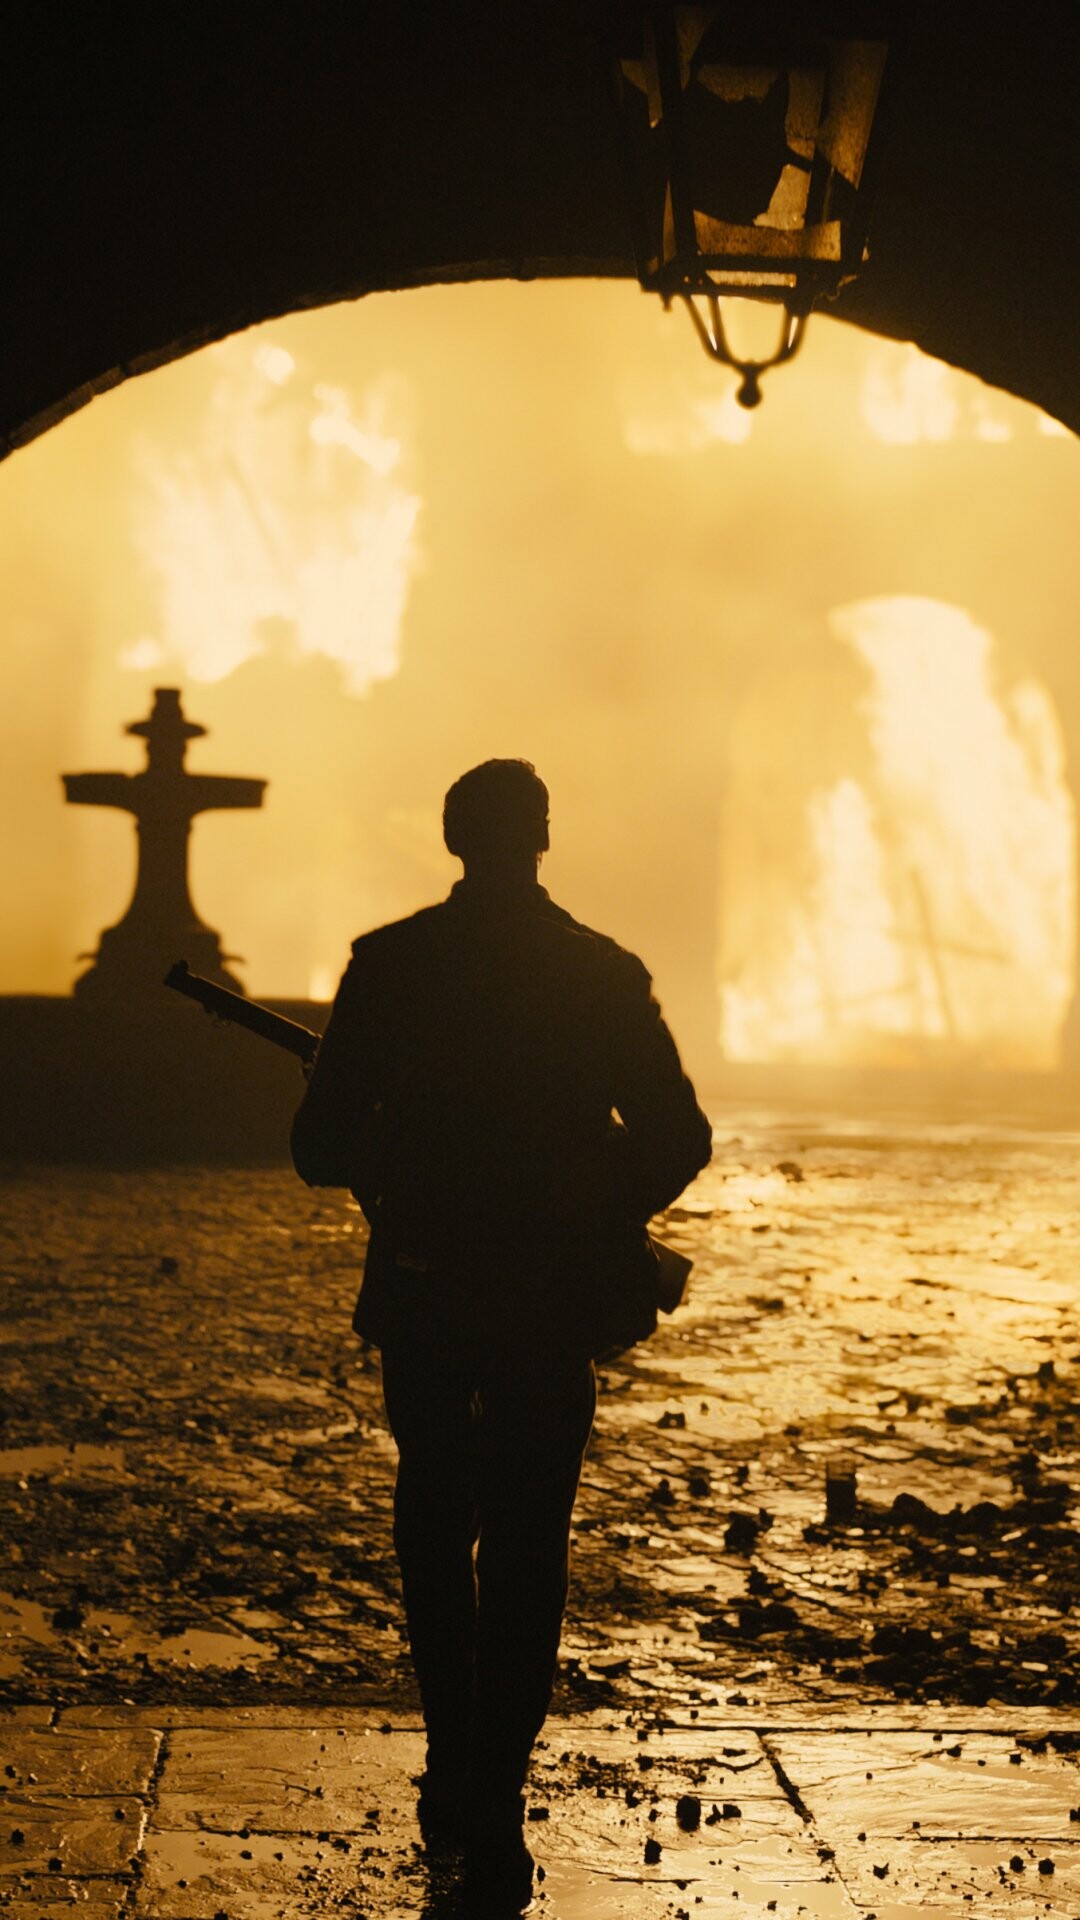 1917 (Movie): Roger Deakins was the cinematographer for the film. 1080x1920 Full HD Wallpaper.